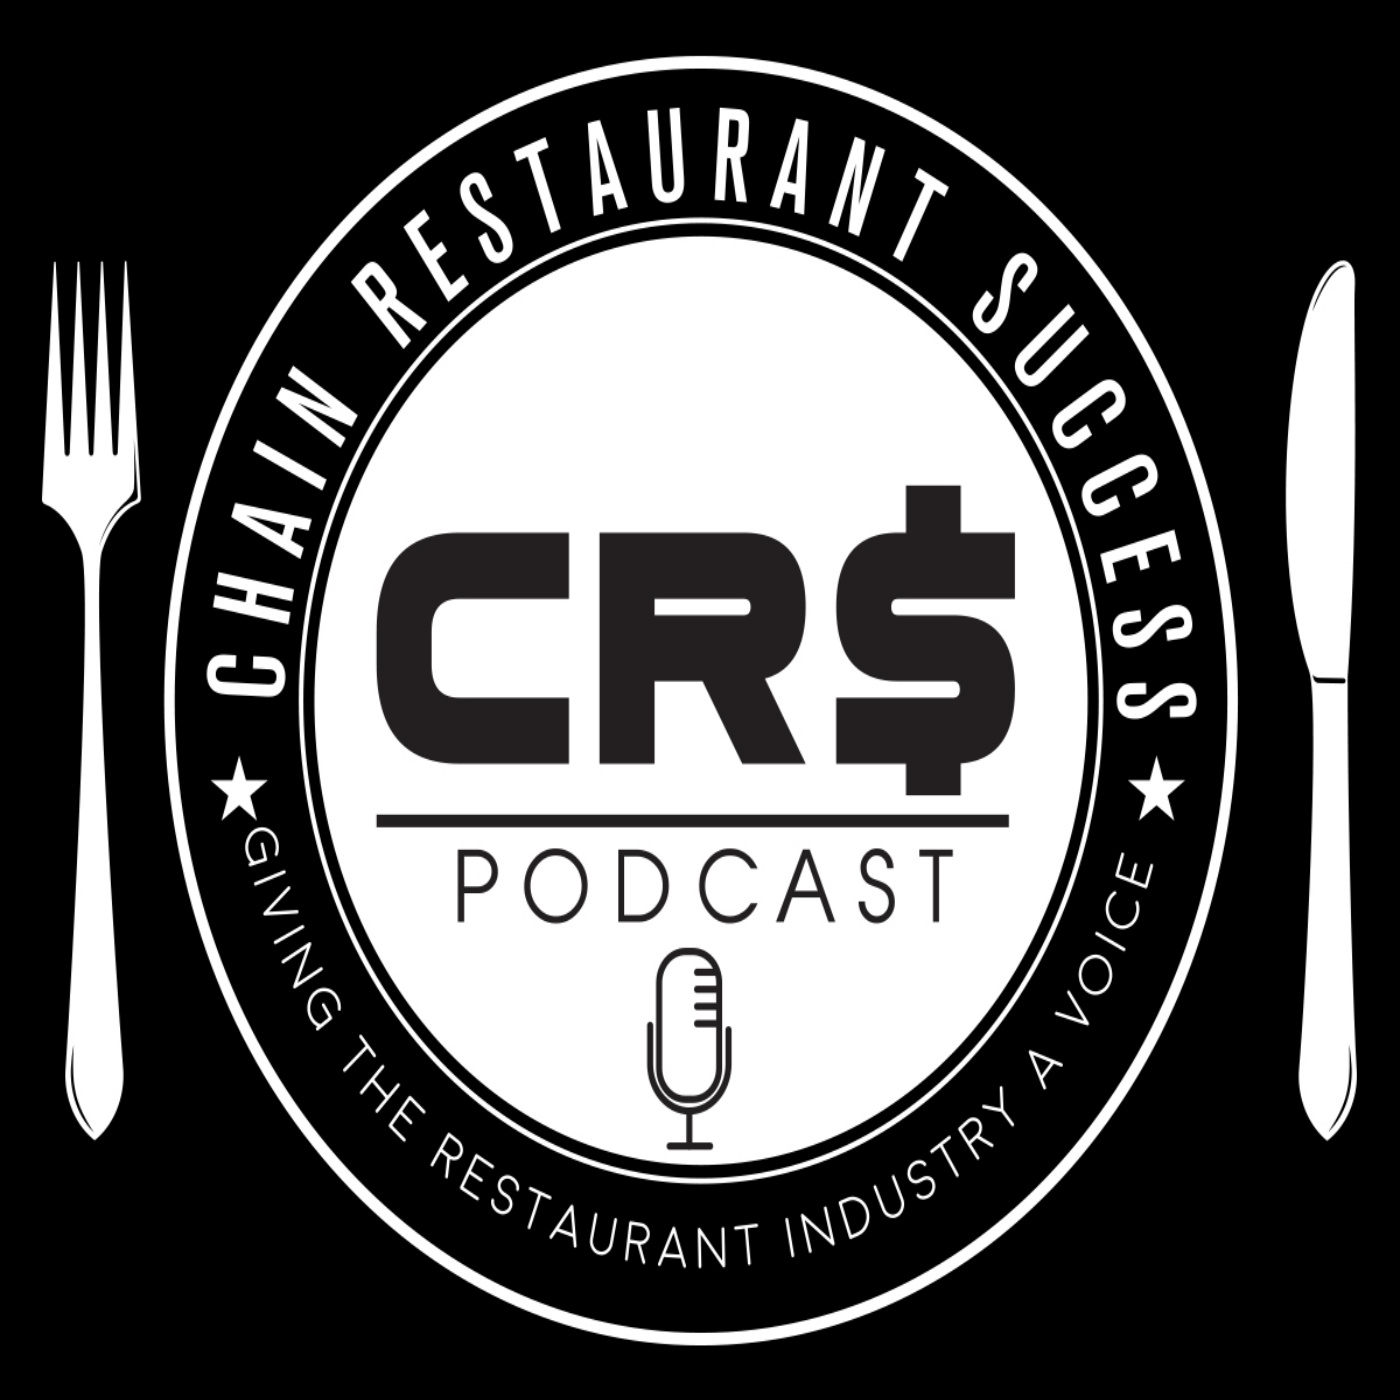 000 About The CRS Podcast